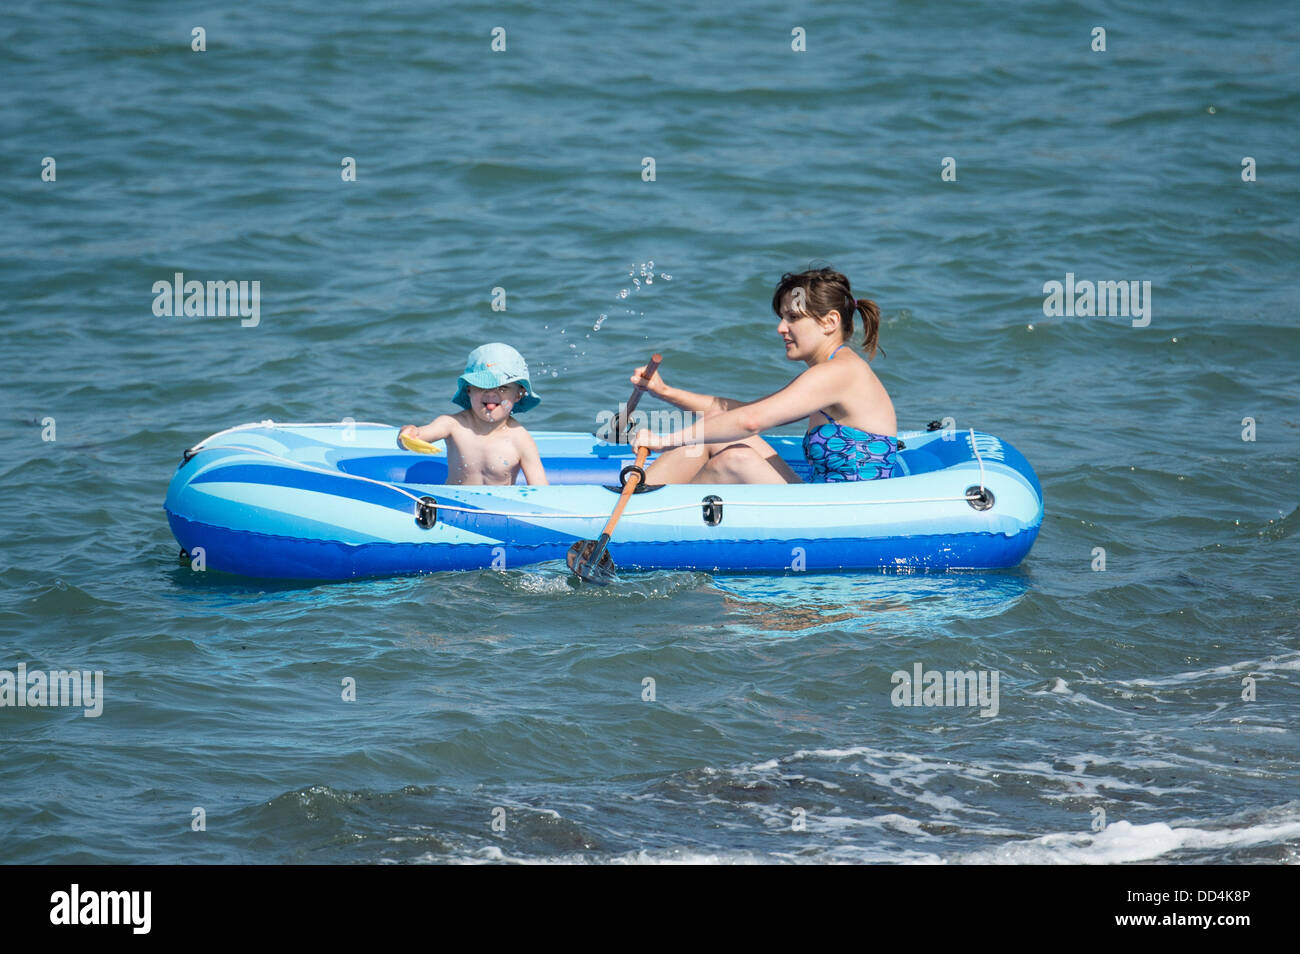 Aberystwyth, UK. 26th Aug, 2013. People enjoying the warm sunny weather on August Bank Holiday Monday at Aberystwyth, on the west Wales coast.  Credit:  keith morris/Alamy Live News Stock Photo